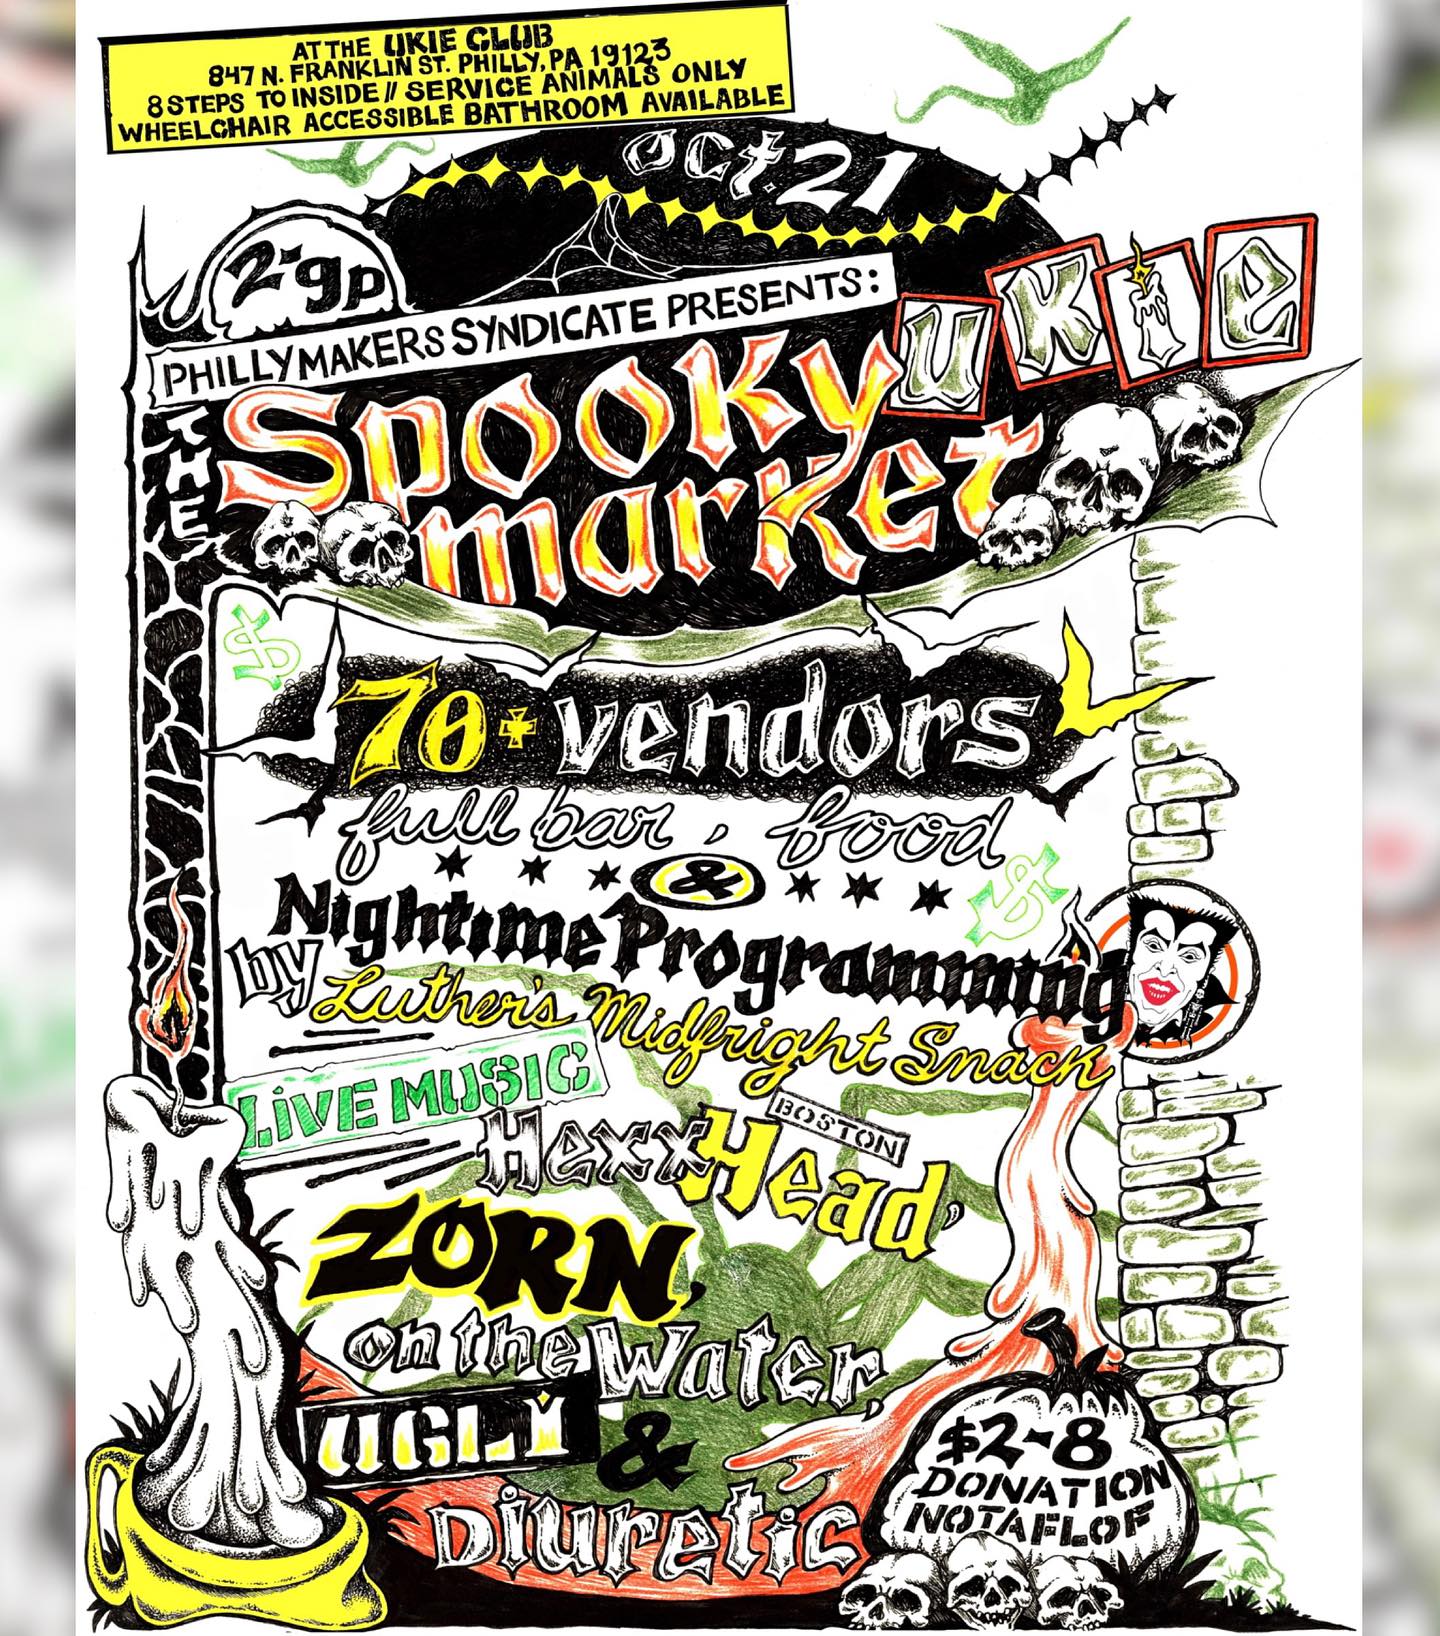 Flyer with spooky drawings like skulls, a vampire, and candles with the following hand-drawn text: Philly Makers Syndicate Presents: The Spooky Ukie Market / 70+ Vendors full bar, food & nightime programming by Lither's Midfright Snack, Hexx, Boston Head, Zorn, On the Water, Ugli, & Diuretic / Oct. 21 / 2–9 p.m. / $2–8 donation NOTAFLOF / at the Ukie Club / 847 N. Franklin St. Philly, PA 19123 8 steps to inside // service animals only Wheelchair accessible bathroom available